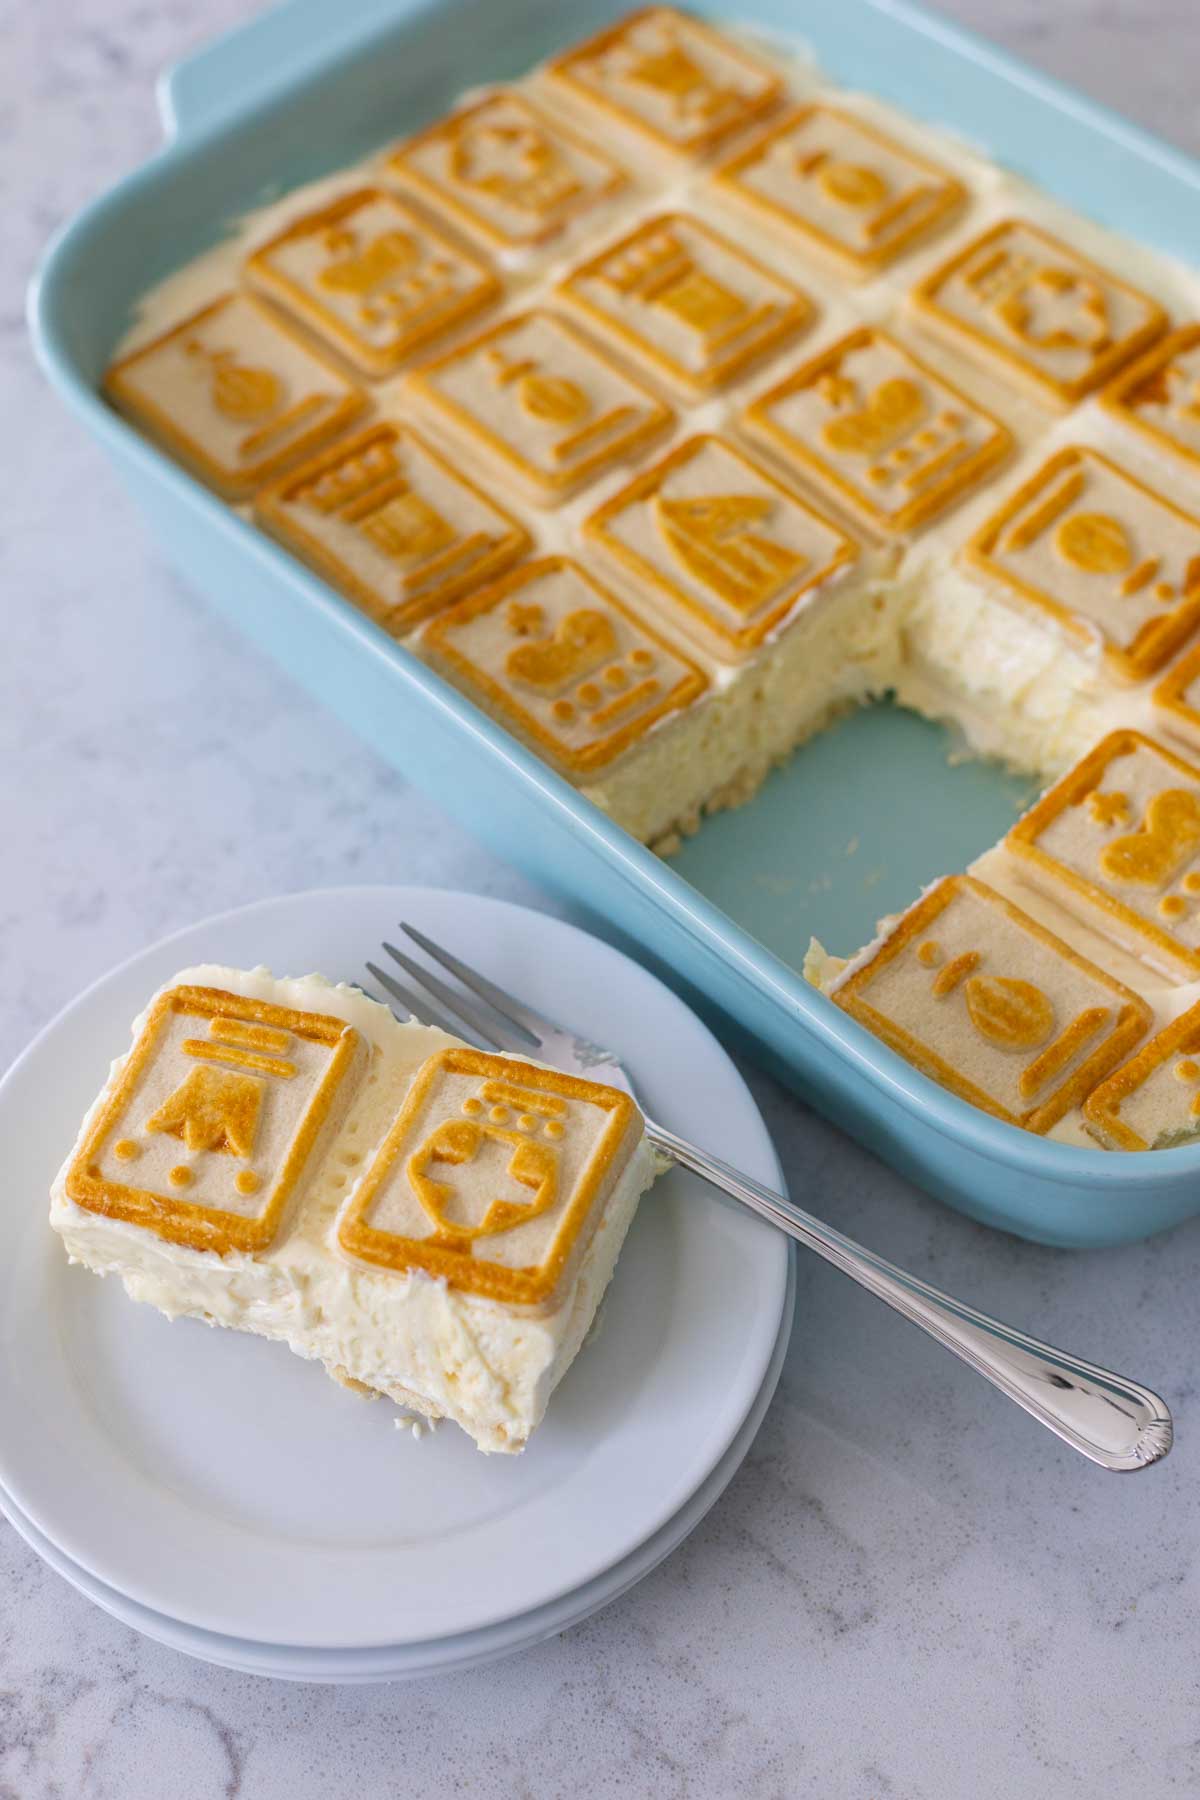 The slice of banana pudding without bananas is on a stack of plates. You can see the spot in the dish where it was cut, it came out cleanly and was easy to slice.